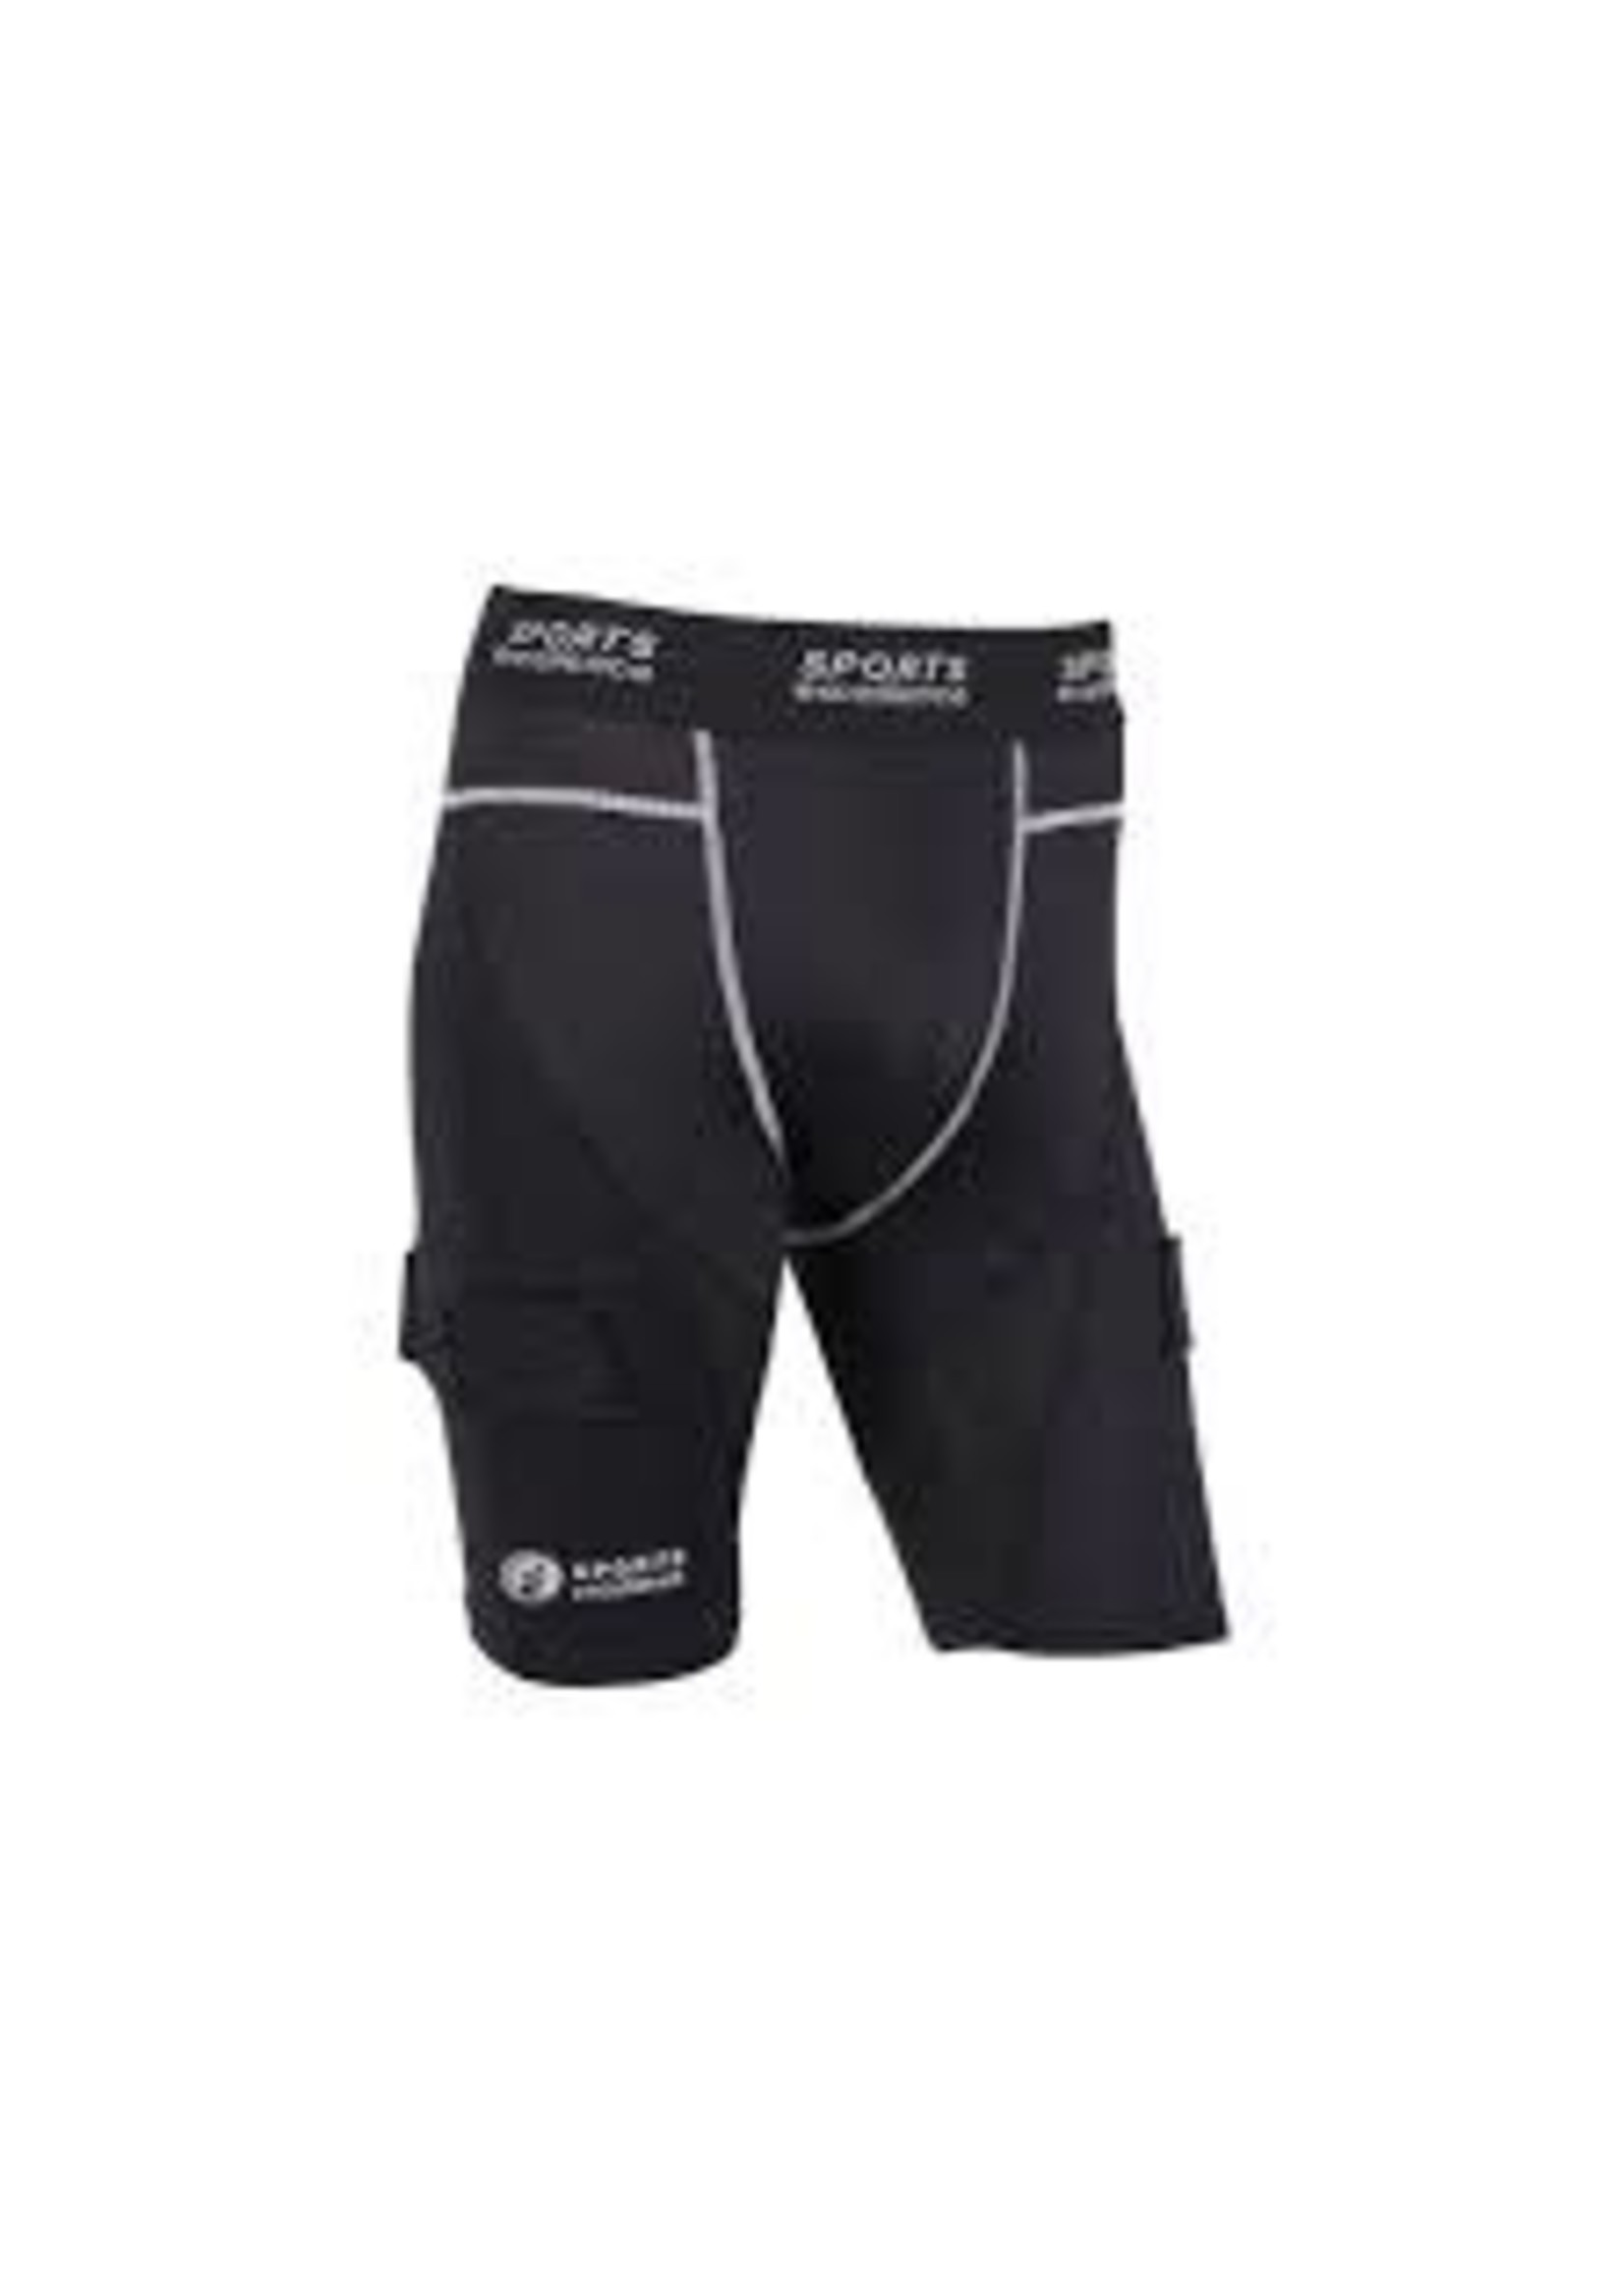 SPORTS EXCELLENCE COMPRESSION SHORTS JUNIOR